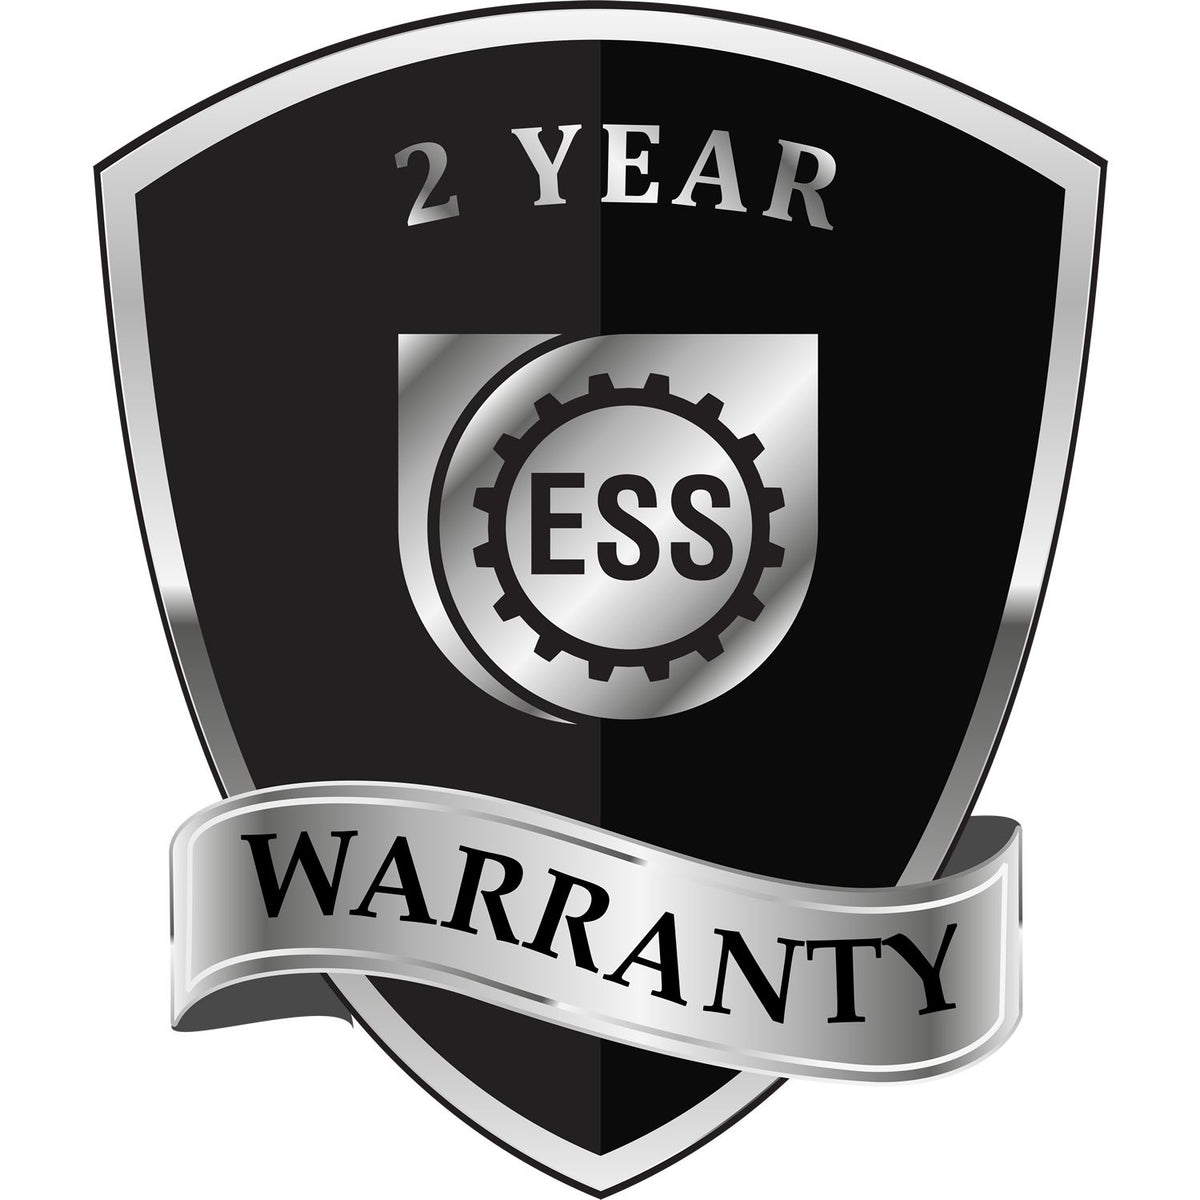 A black and silver badge or emblem showing warranty information for the Gift Washington Engineer Seal